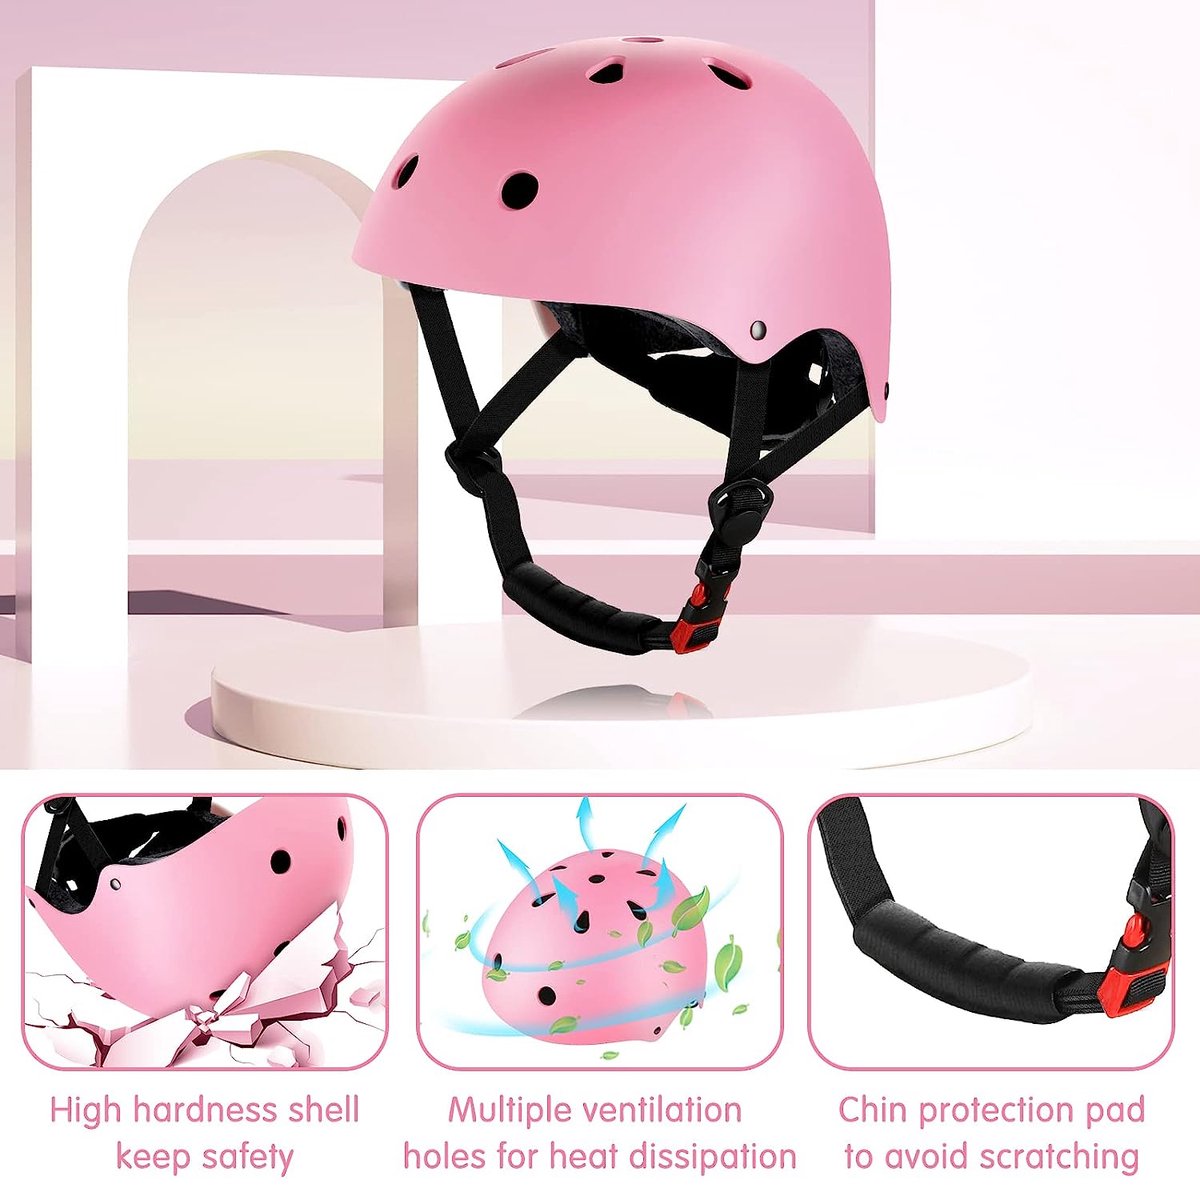 Casque rose avec protections coudieres genouilleres fille 